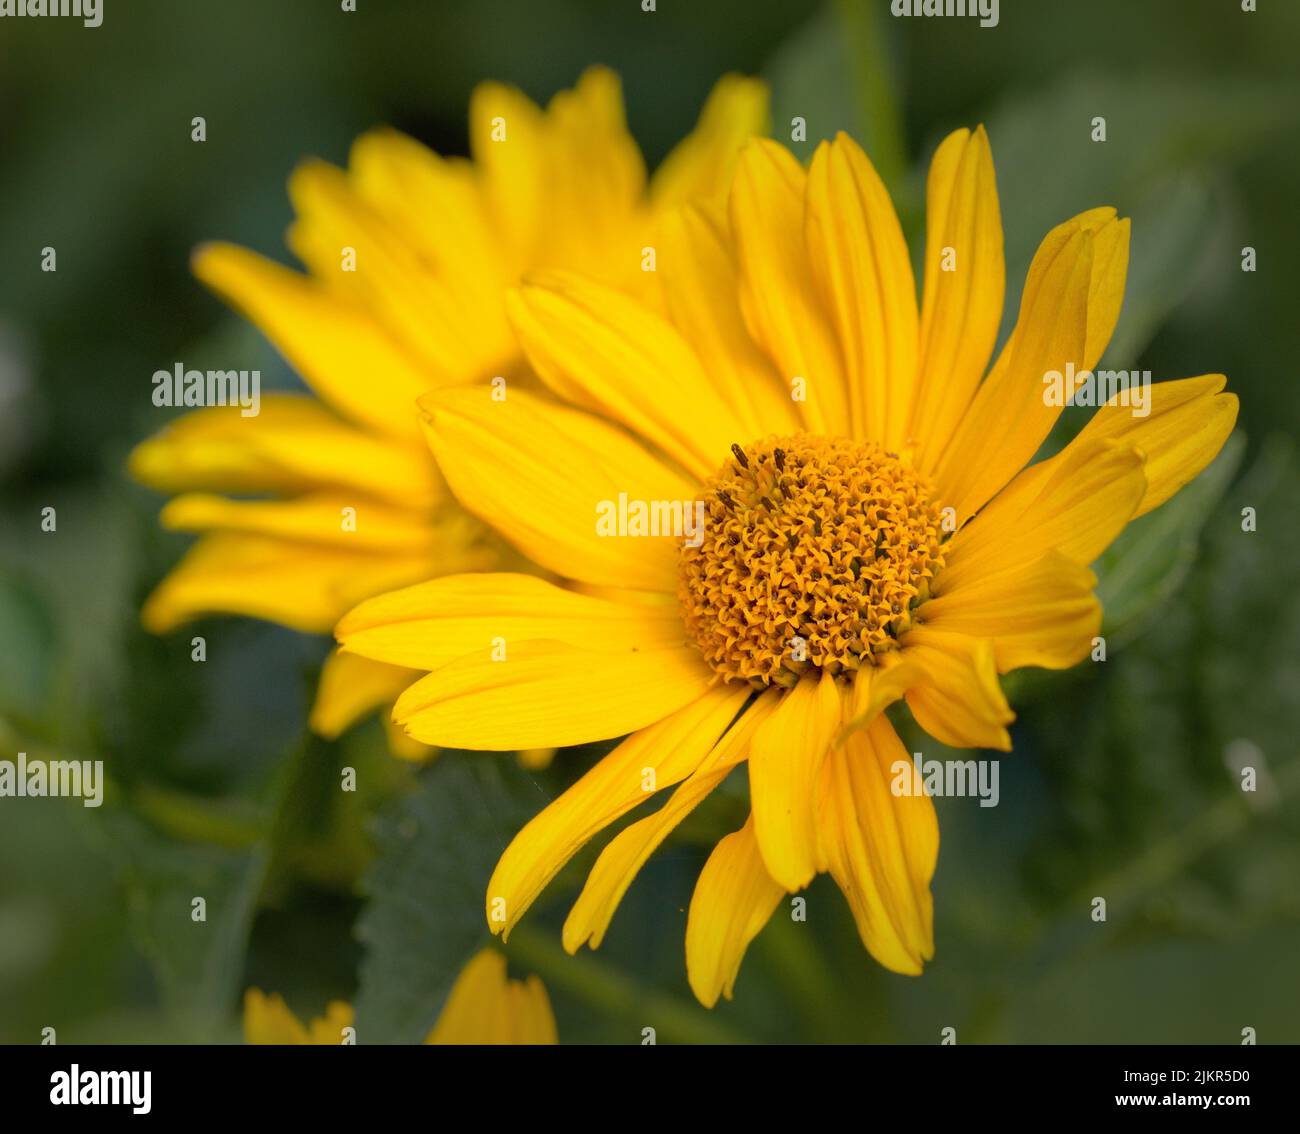 Macro photography of a yellow flower Stock Photo